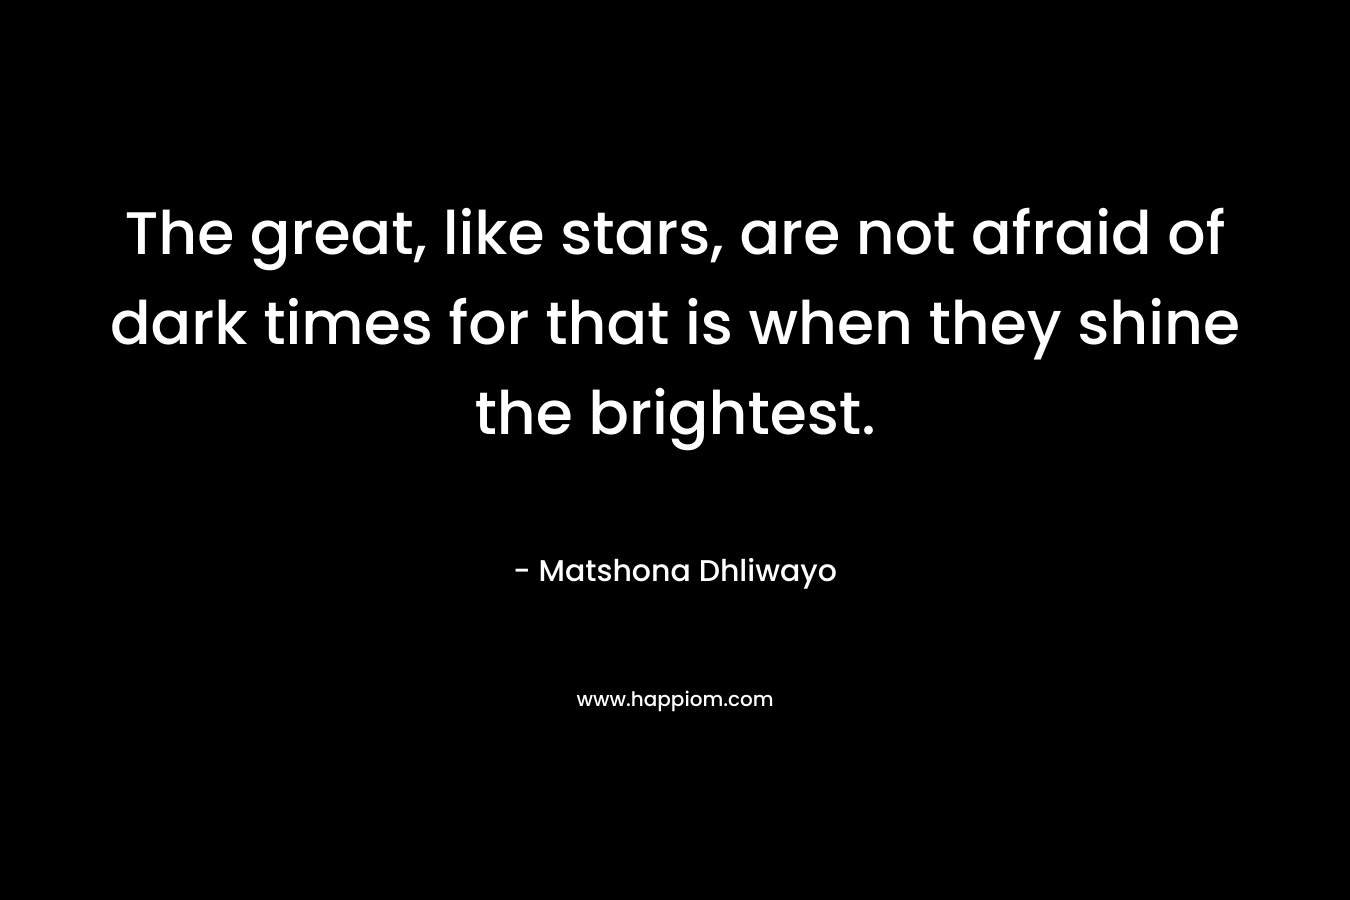 The great, like stars, are not afraid of dark times for that is when they shine the brightest. – Matshona Dhliwayo